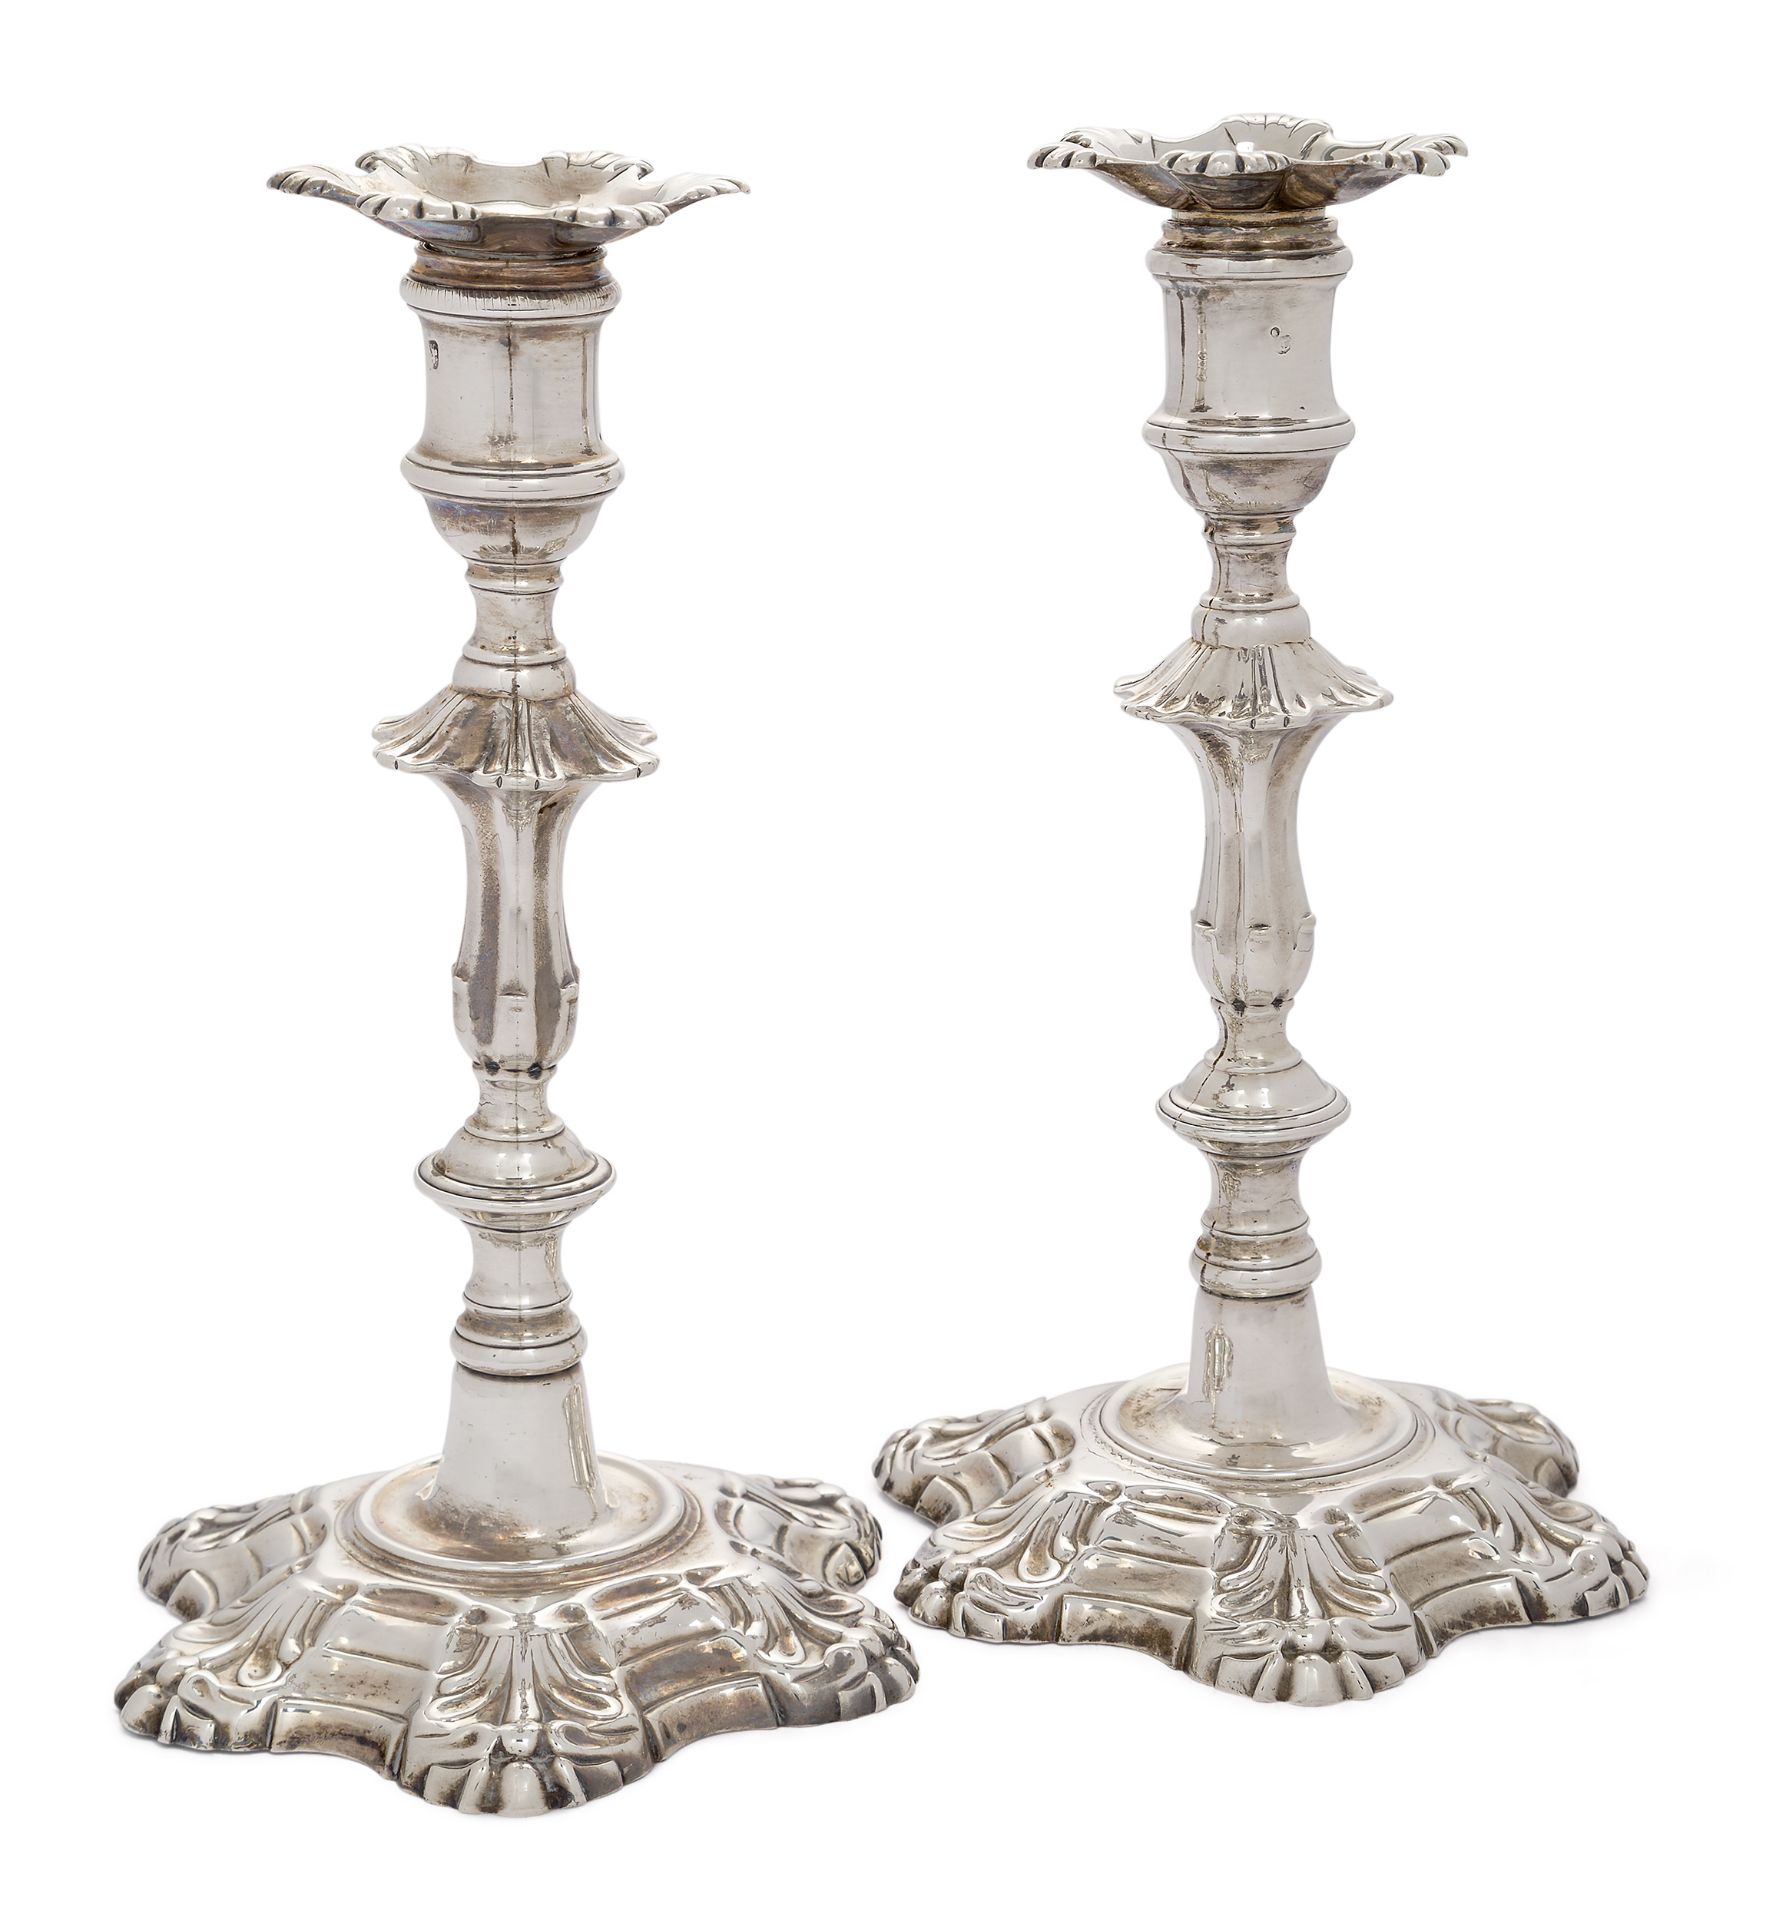 A pair of early George III silver candlesticks, London, 1762, William Cafe, the knopped stems wit...